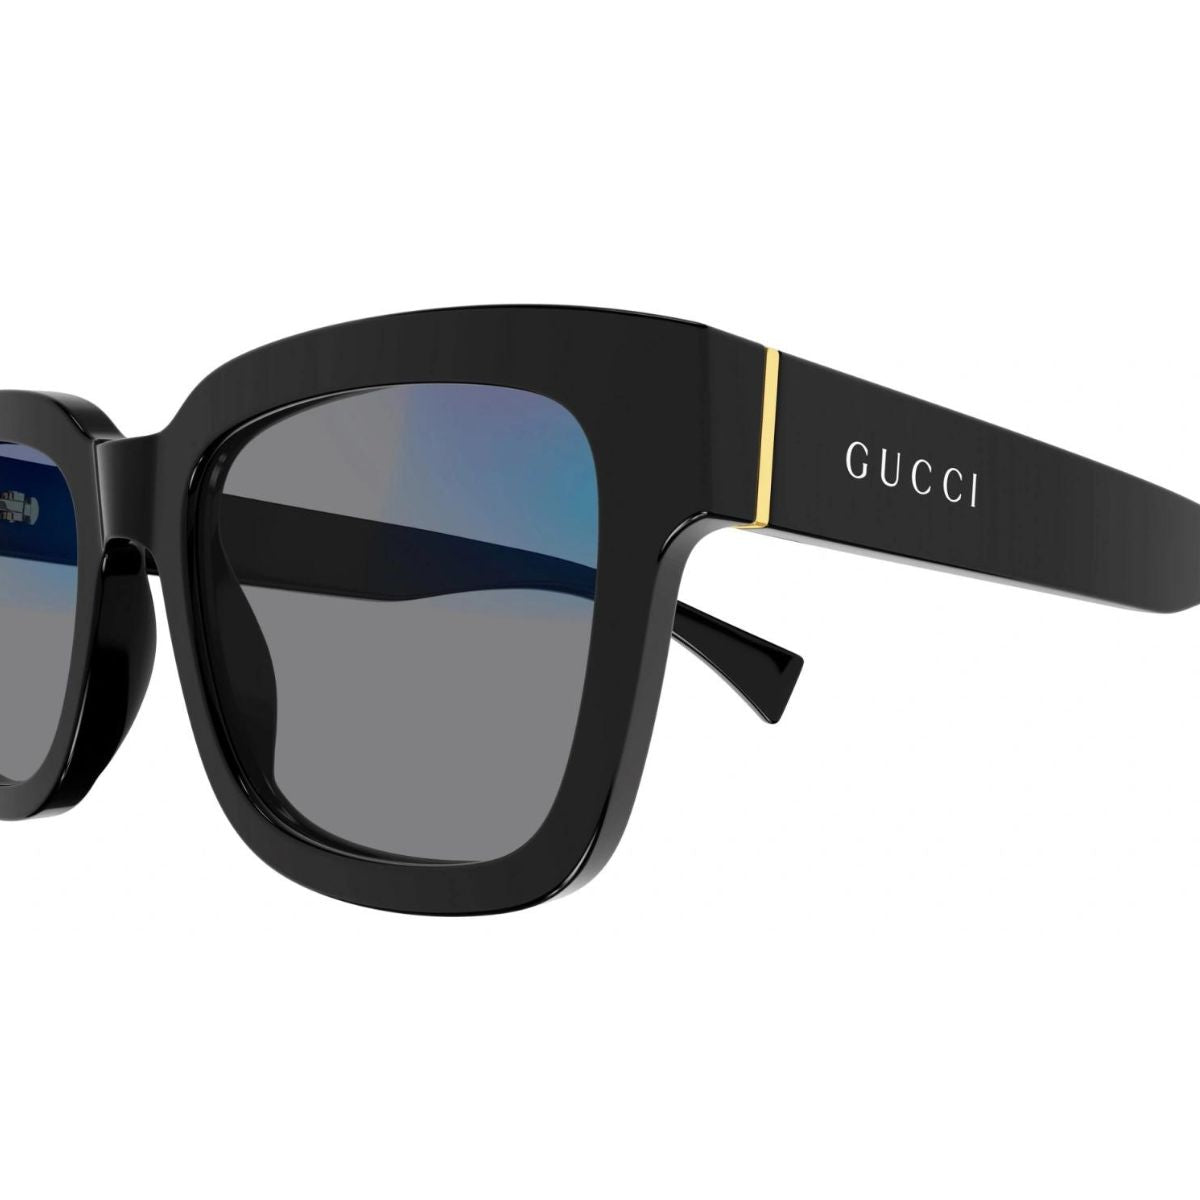 "Stylish Gucci GG1138S 001 Transparent Sunglass For Men's At Optorium"